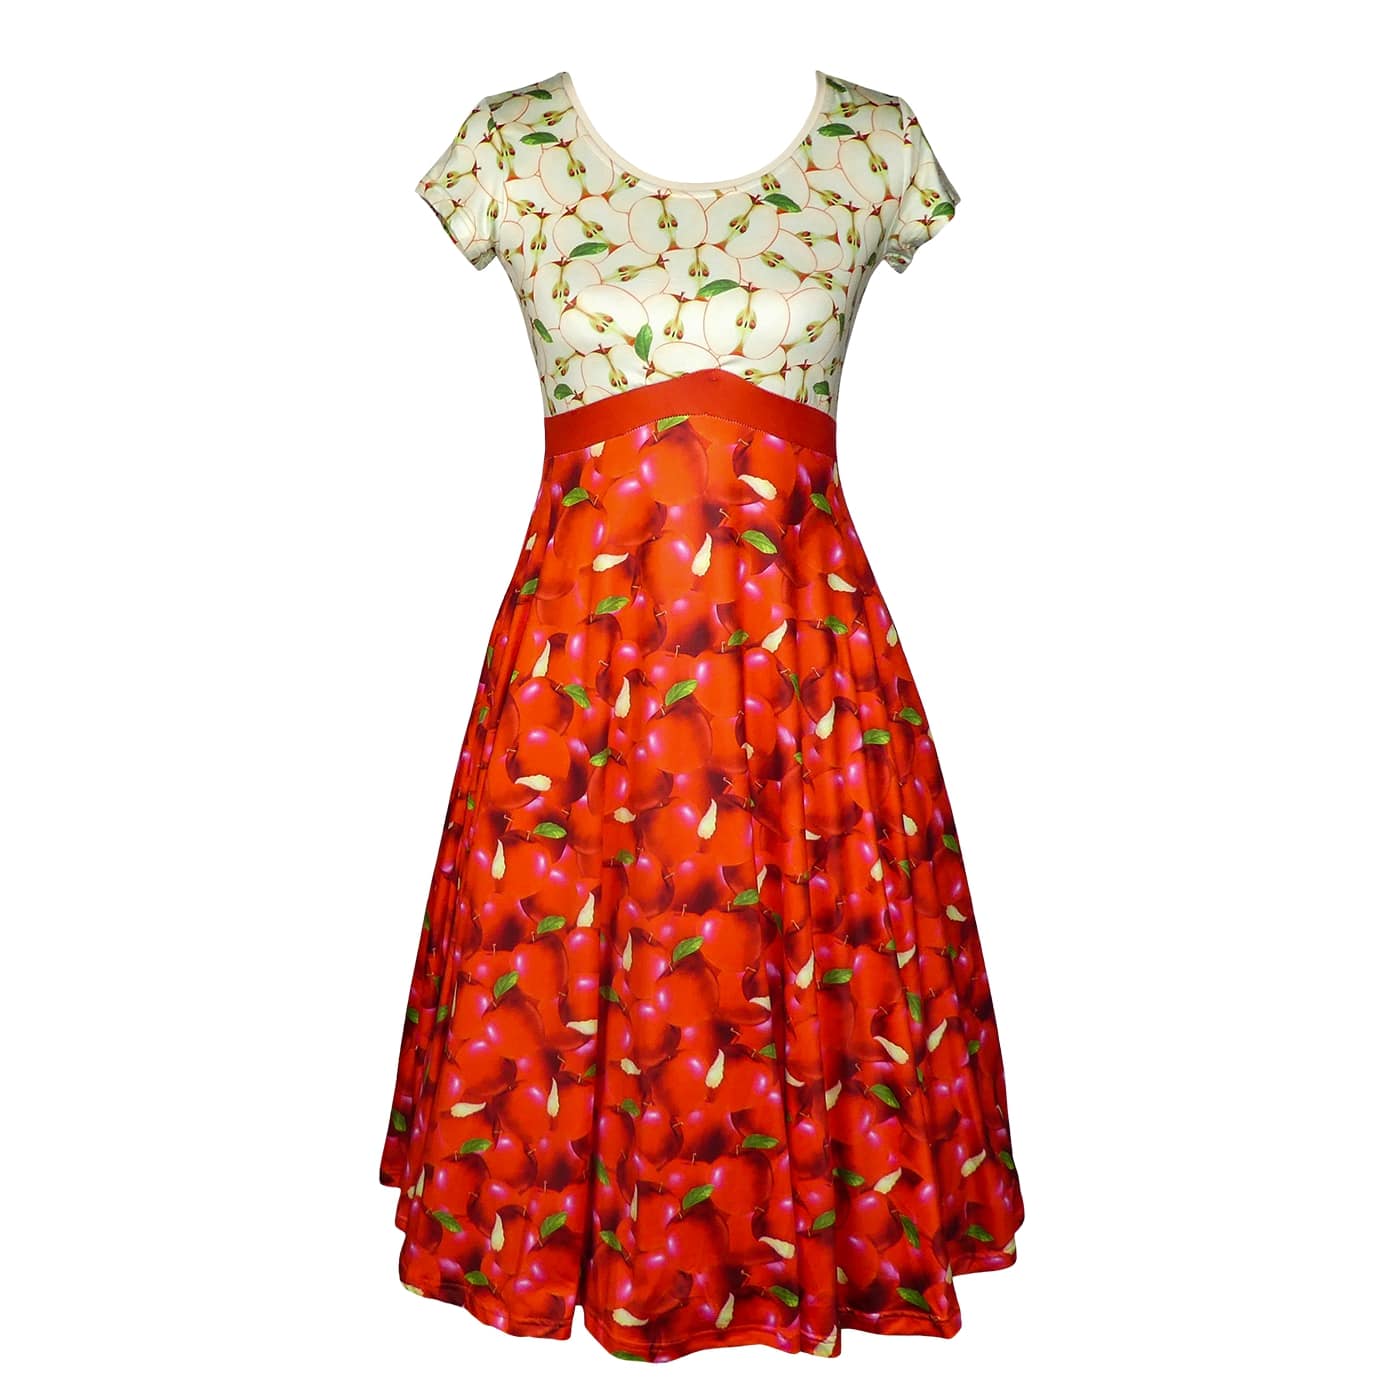 Orchard Tea Dress by RainbowsAndFairies.com (Red Apples - Apple Core - Snow White - Pin Up Dress - Rockabilly - Rock & Roll) - SKU: CL_TEADR_ORCHD_ORG - Pic 01